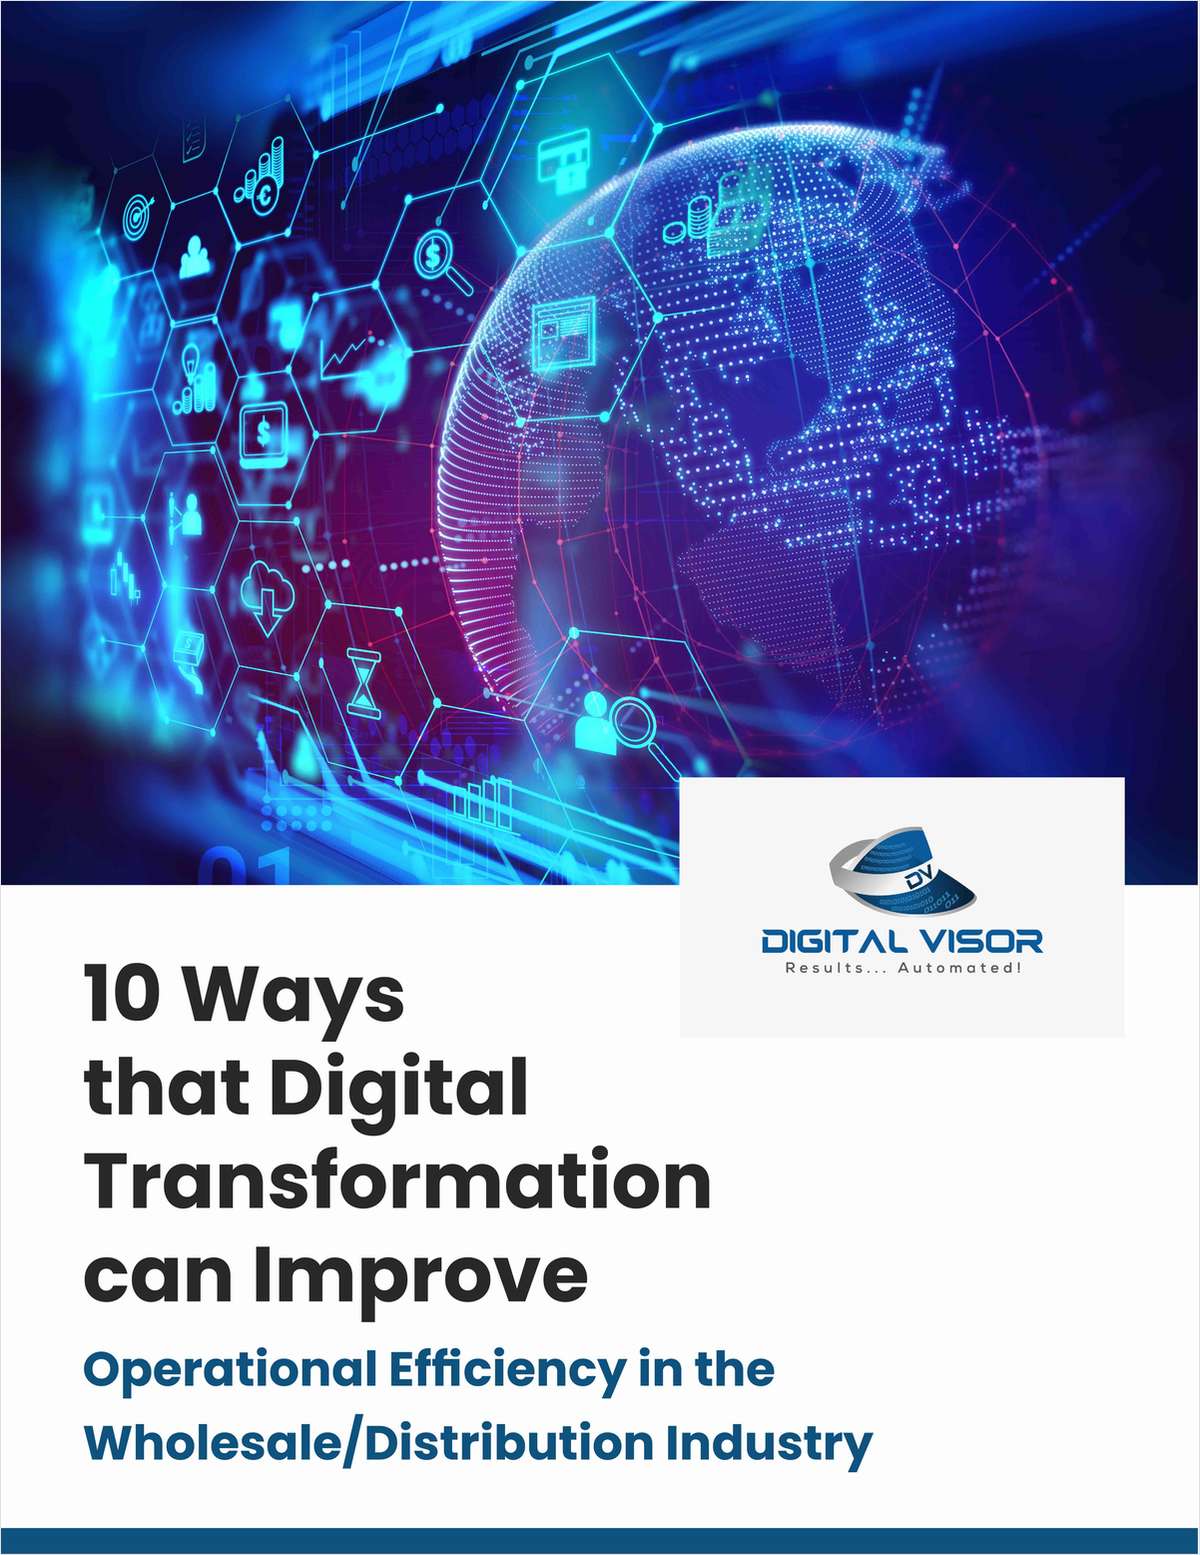 10 Ways That Digital Transformation Improves Operational Efficiency in the Wholesale Distribution Industry